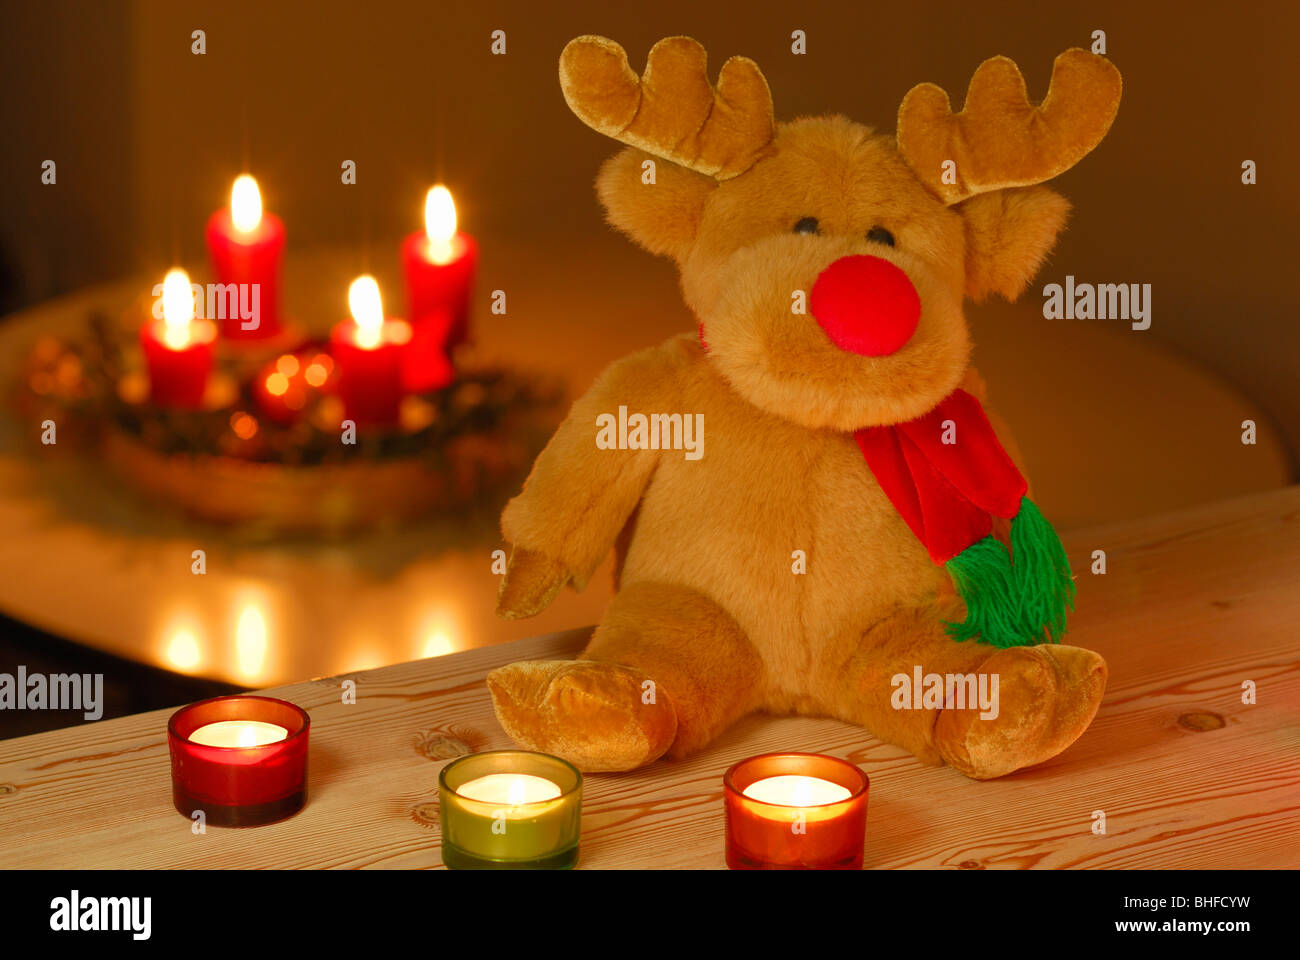 Rudolph the Red-Nosed Reindeer as stuffed animal sitting in front of burning candles, with advent wreath in background Stock Photo